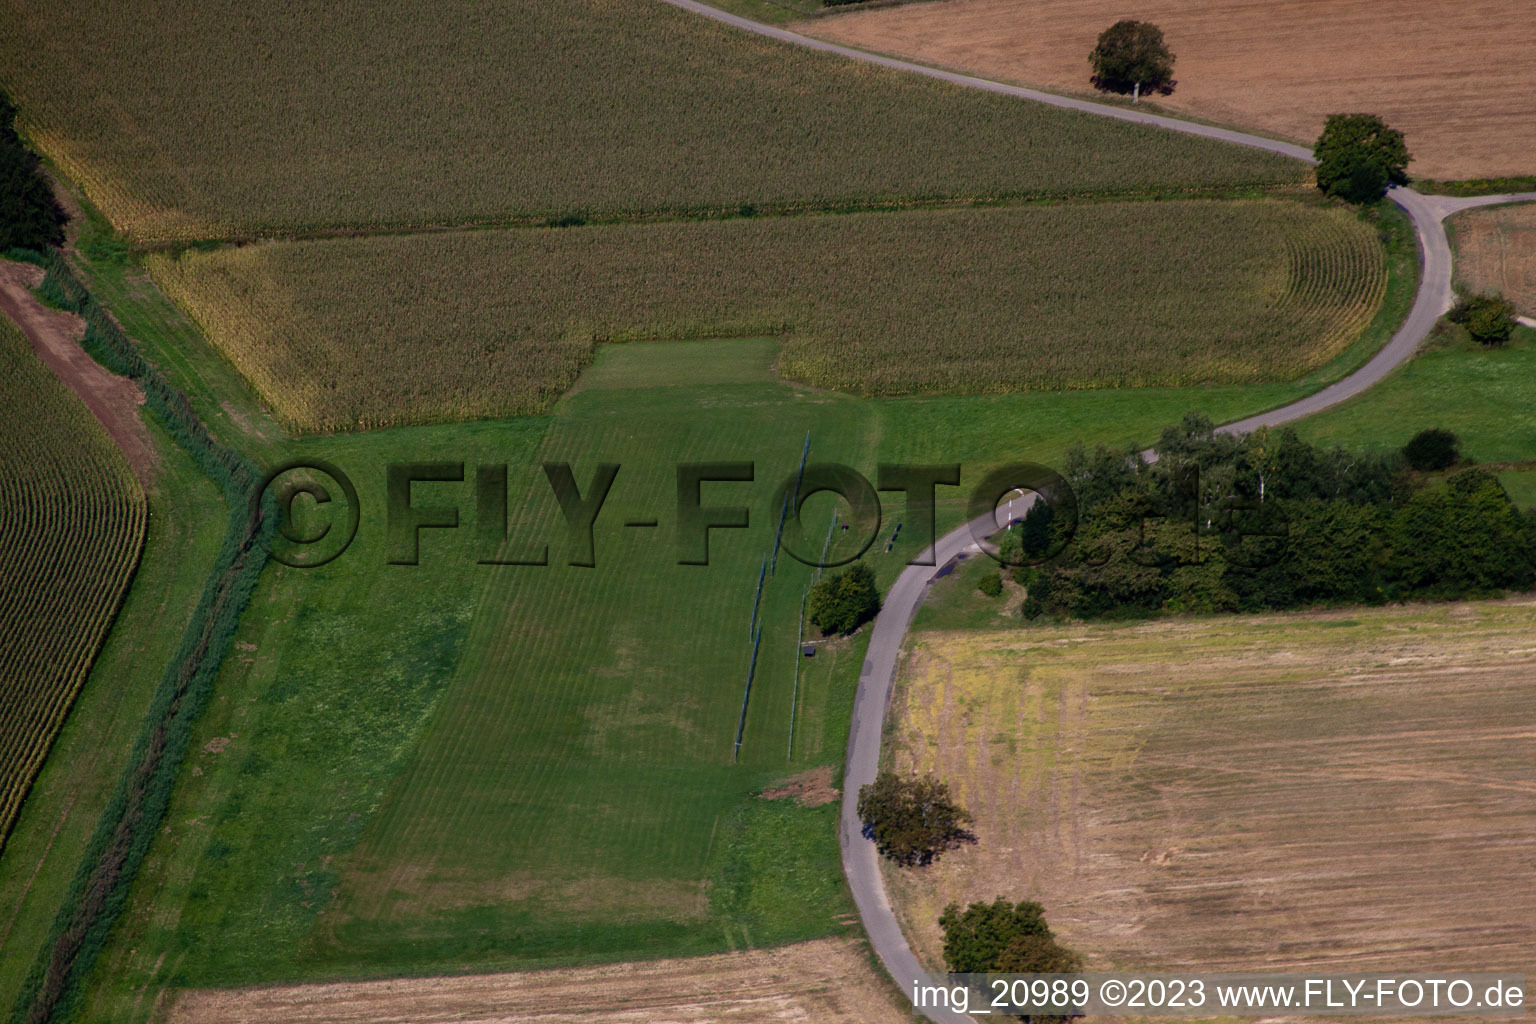 Model airfield in Oberotterbach in the state Rhineland-Palatinate, Germany